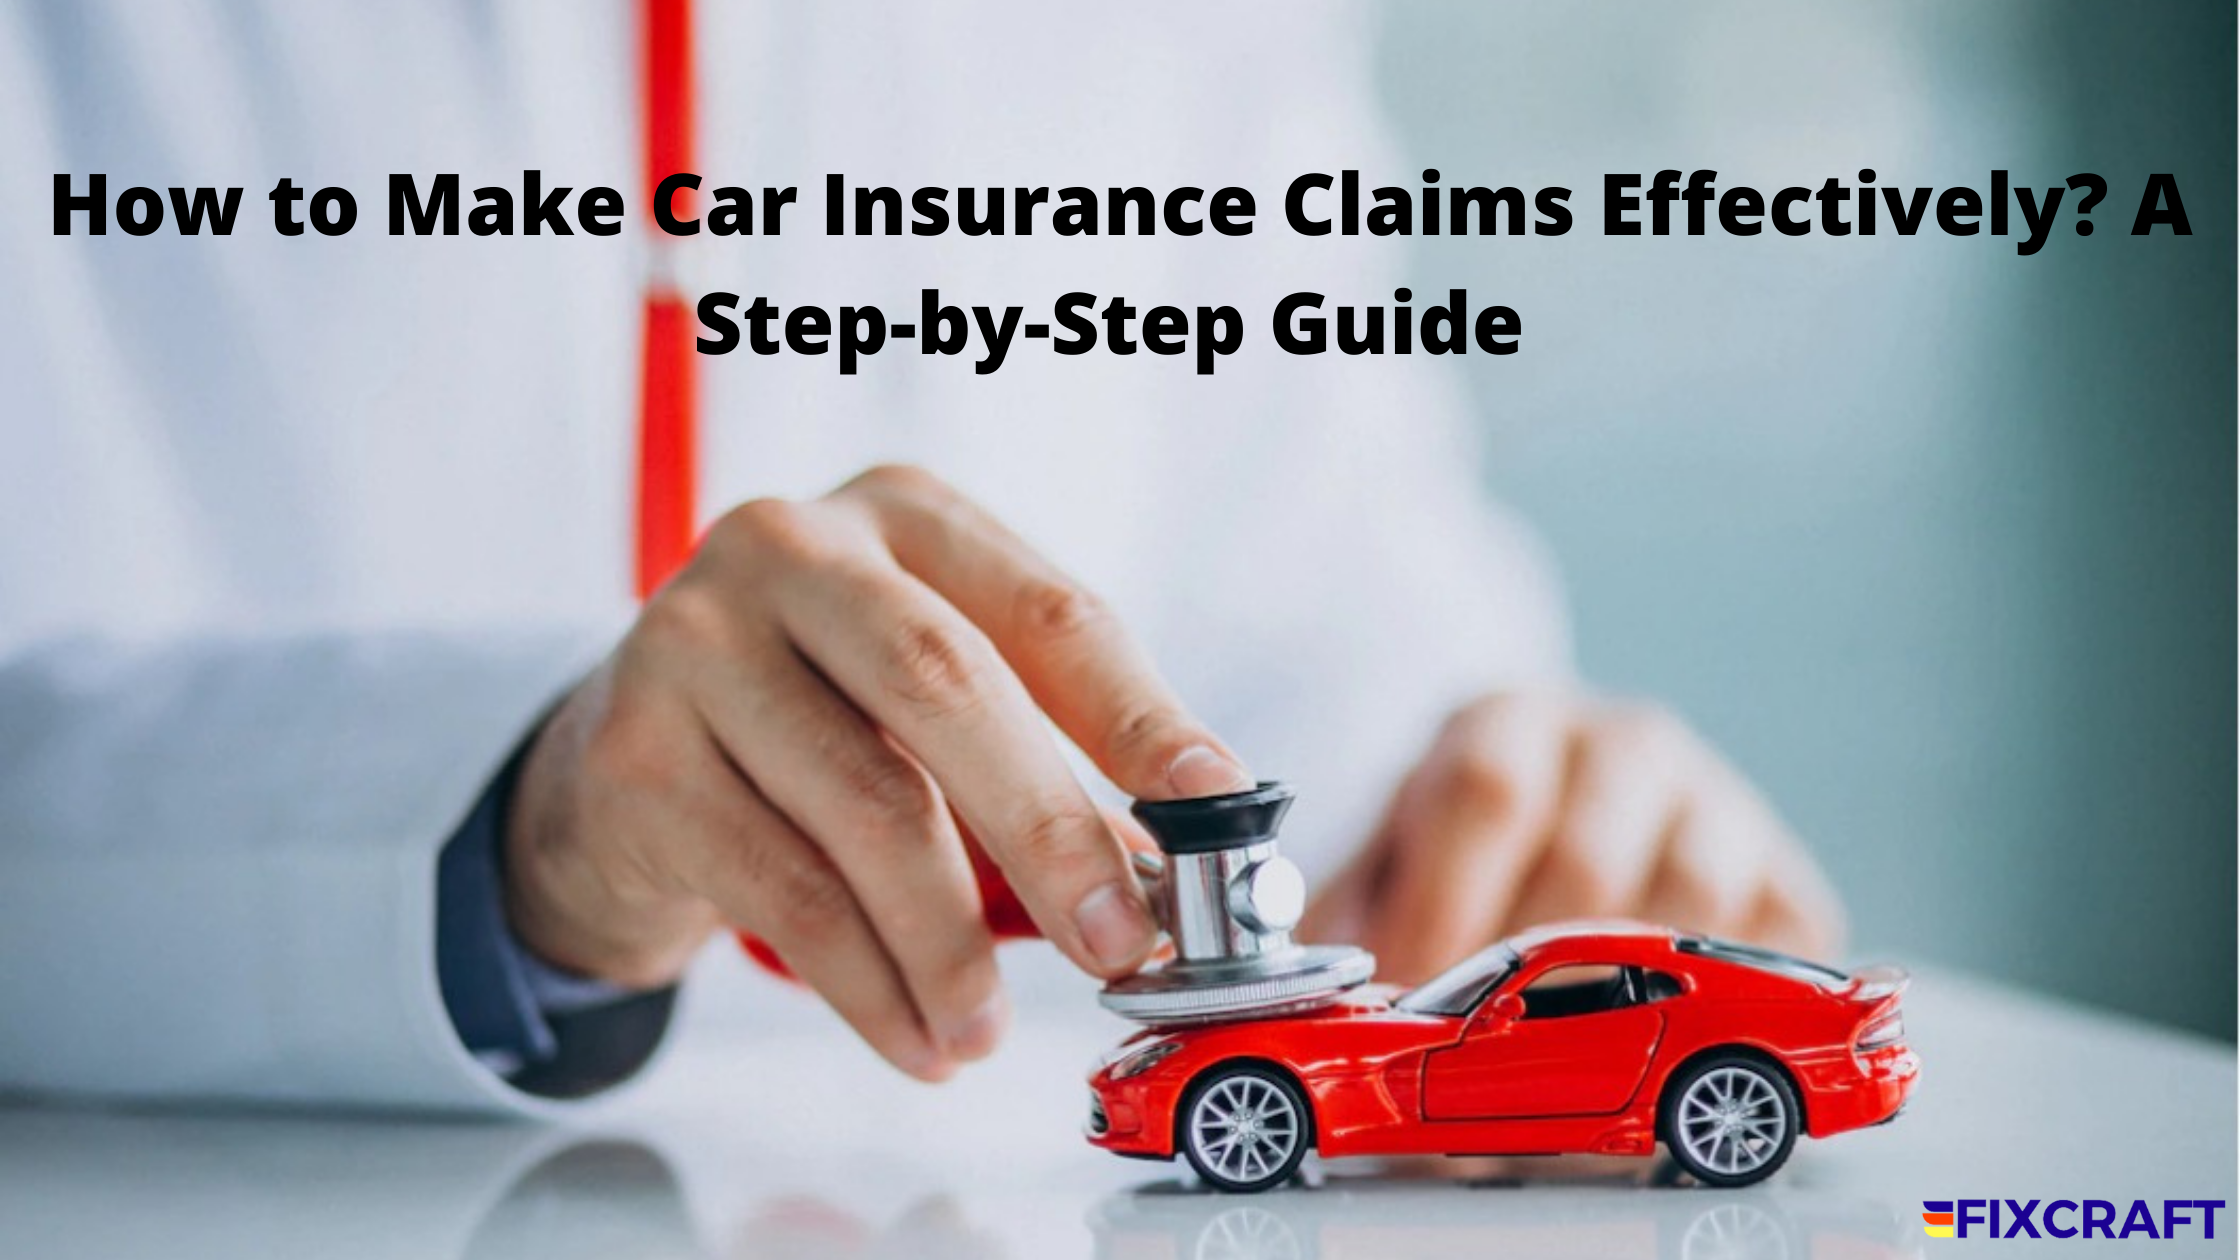 How to Make Car Insurance Claims Effectively A Step-by-Step Guide